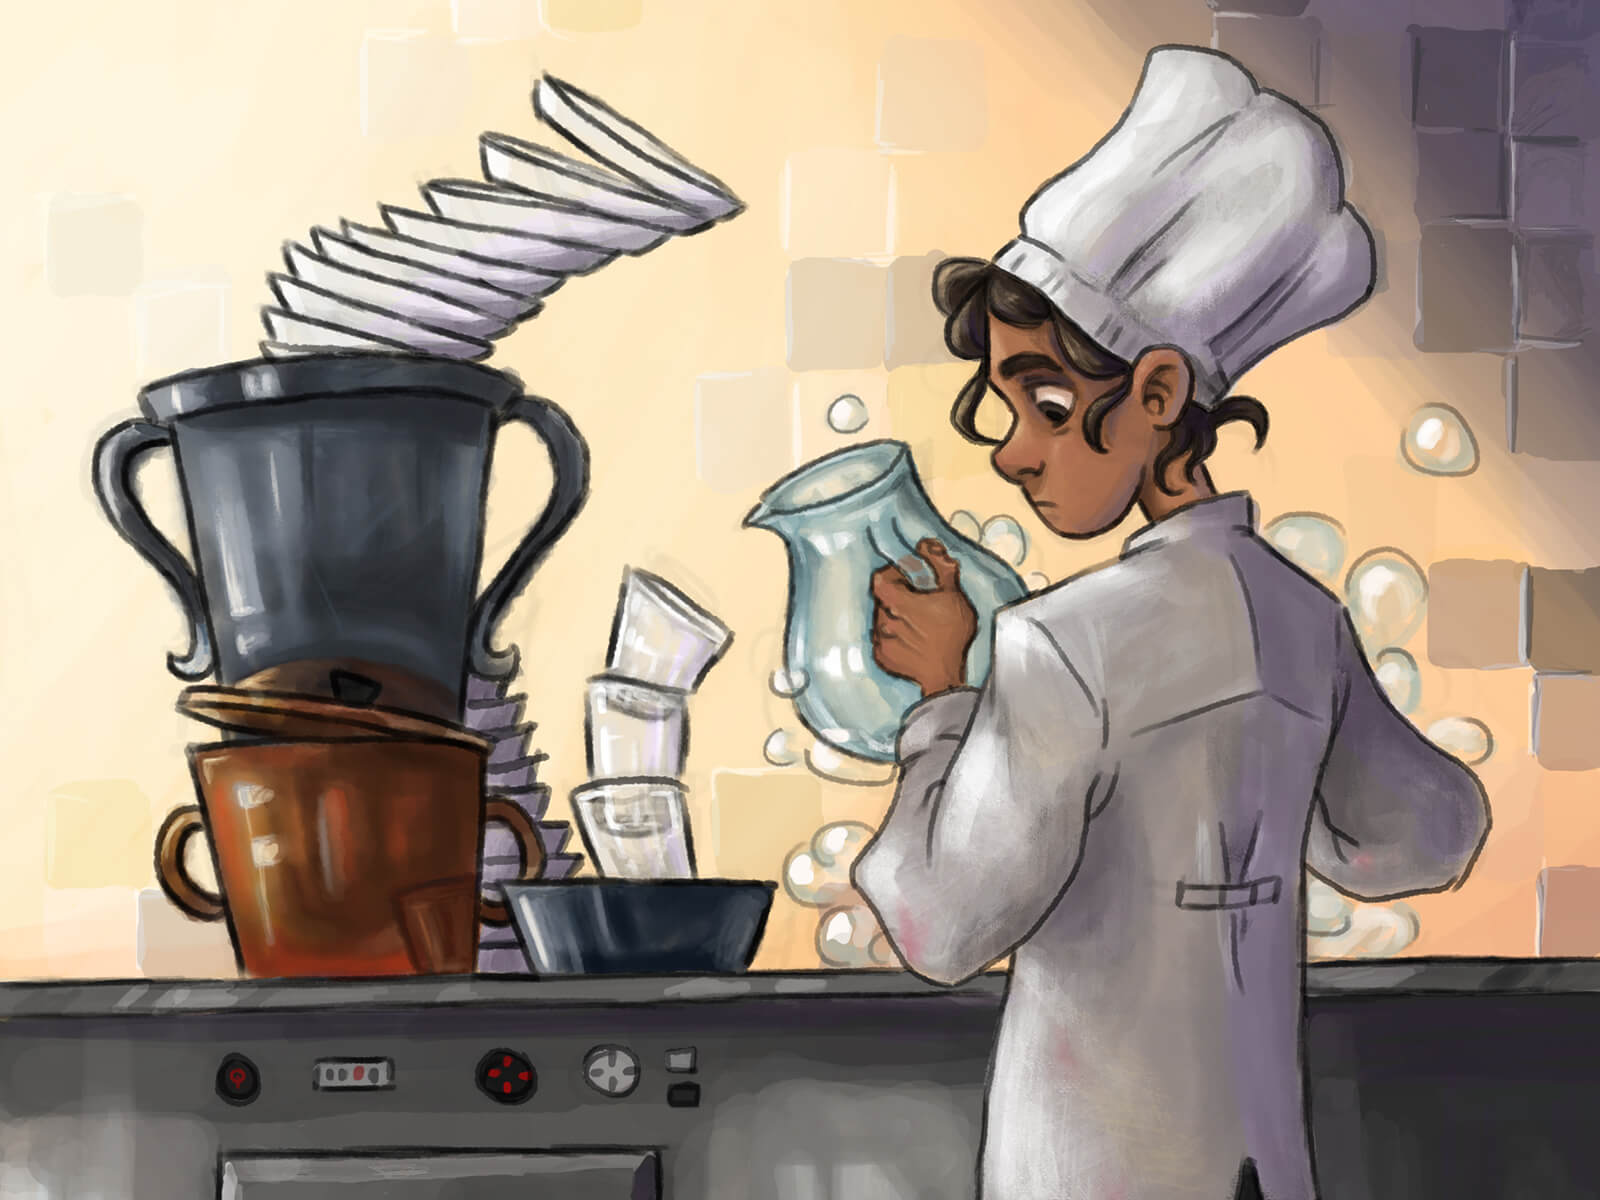 A woman in a chef&#039;s uniform washing dishes next to a tilting stack of plates looks down at a small black kitten.